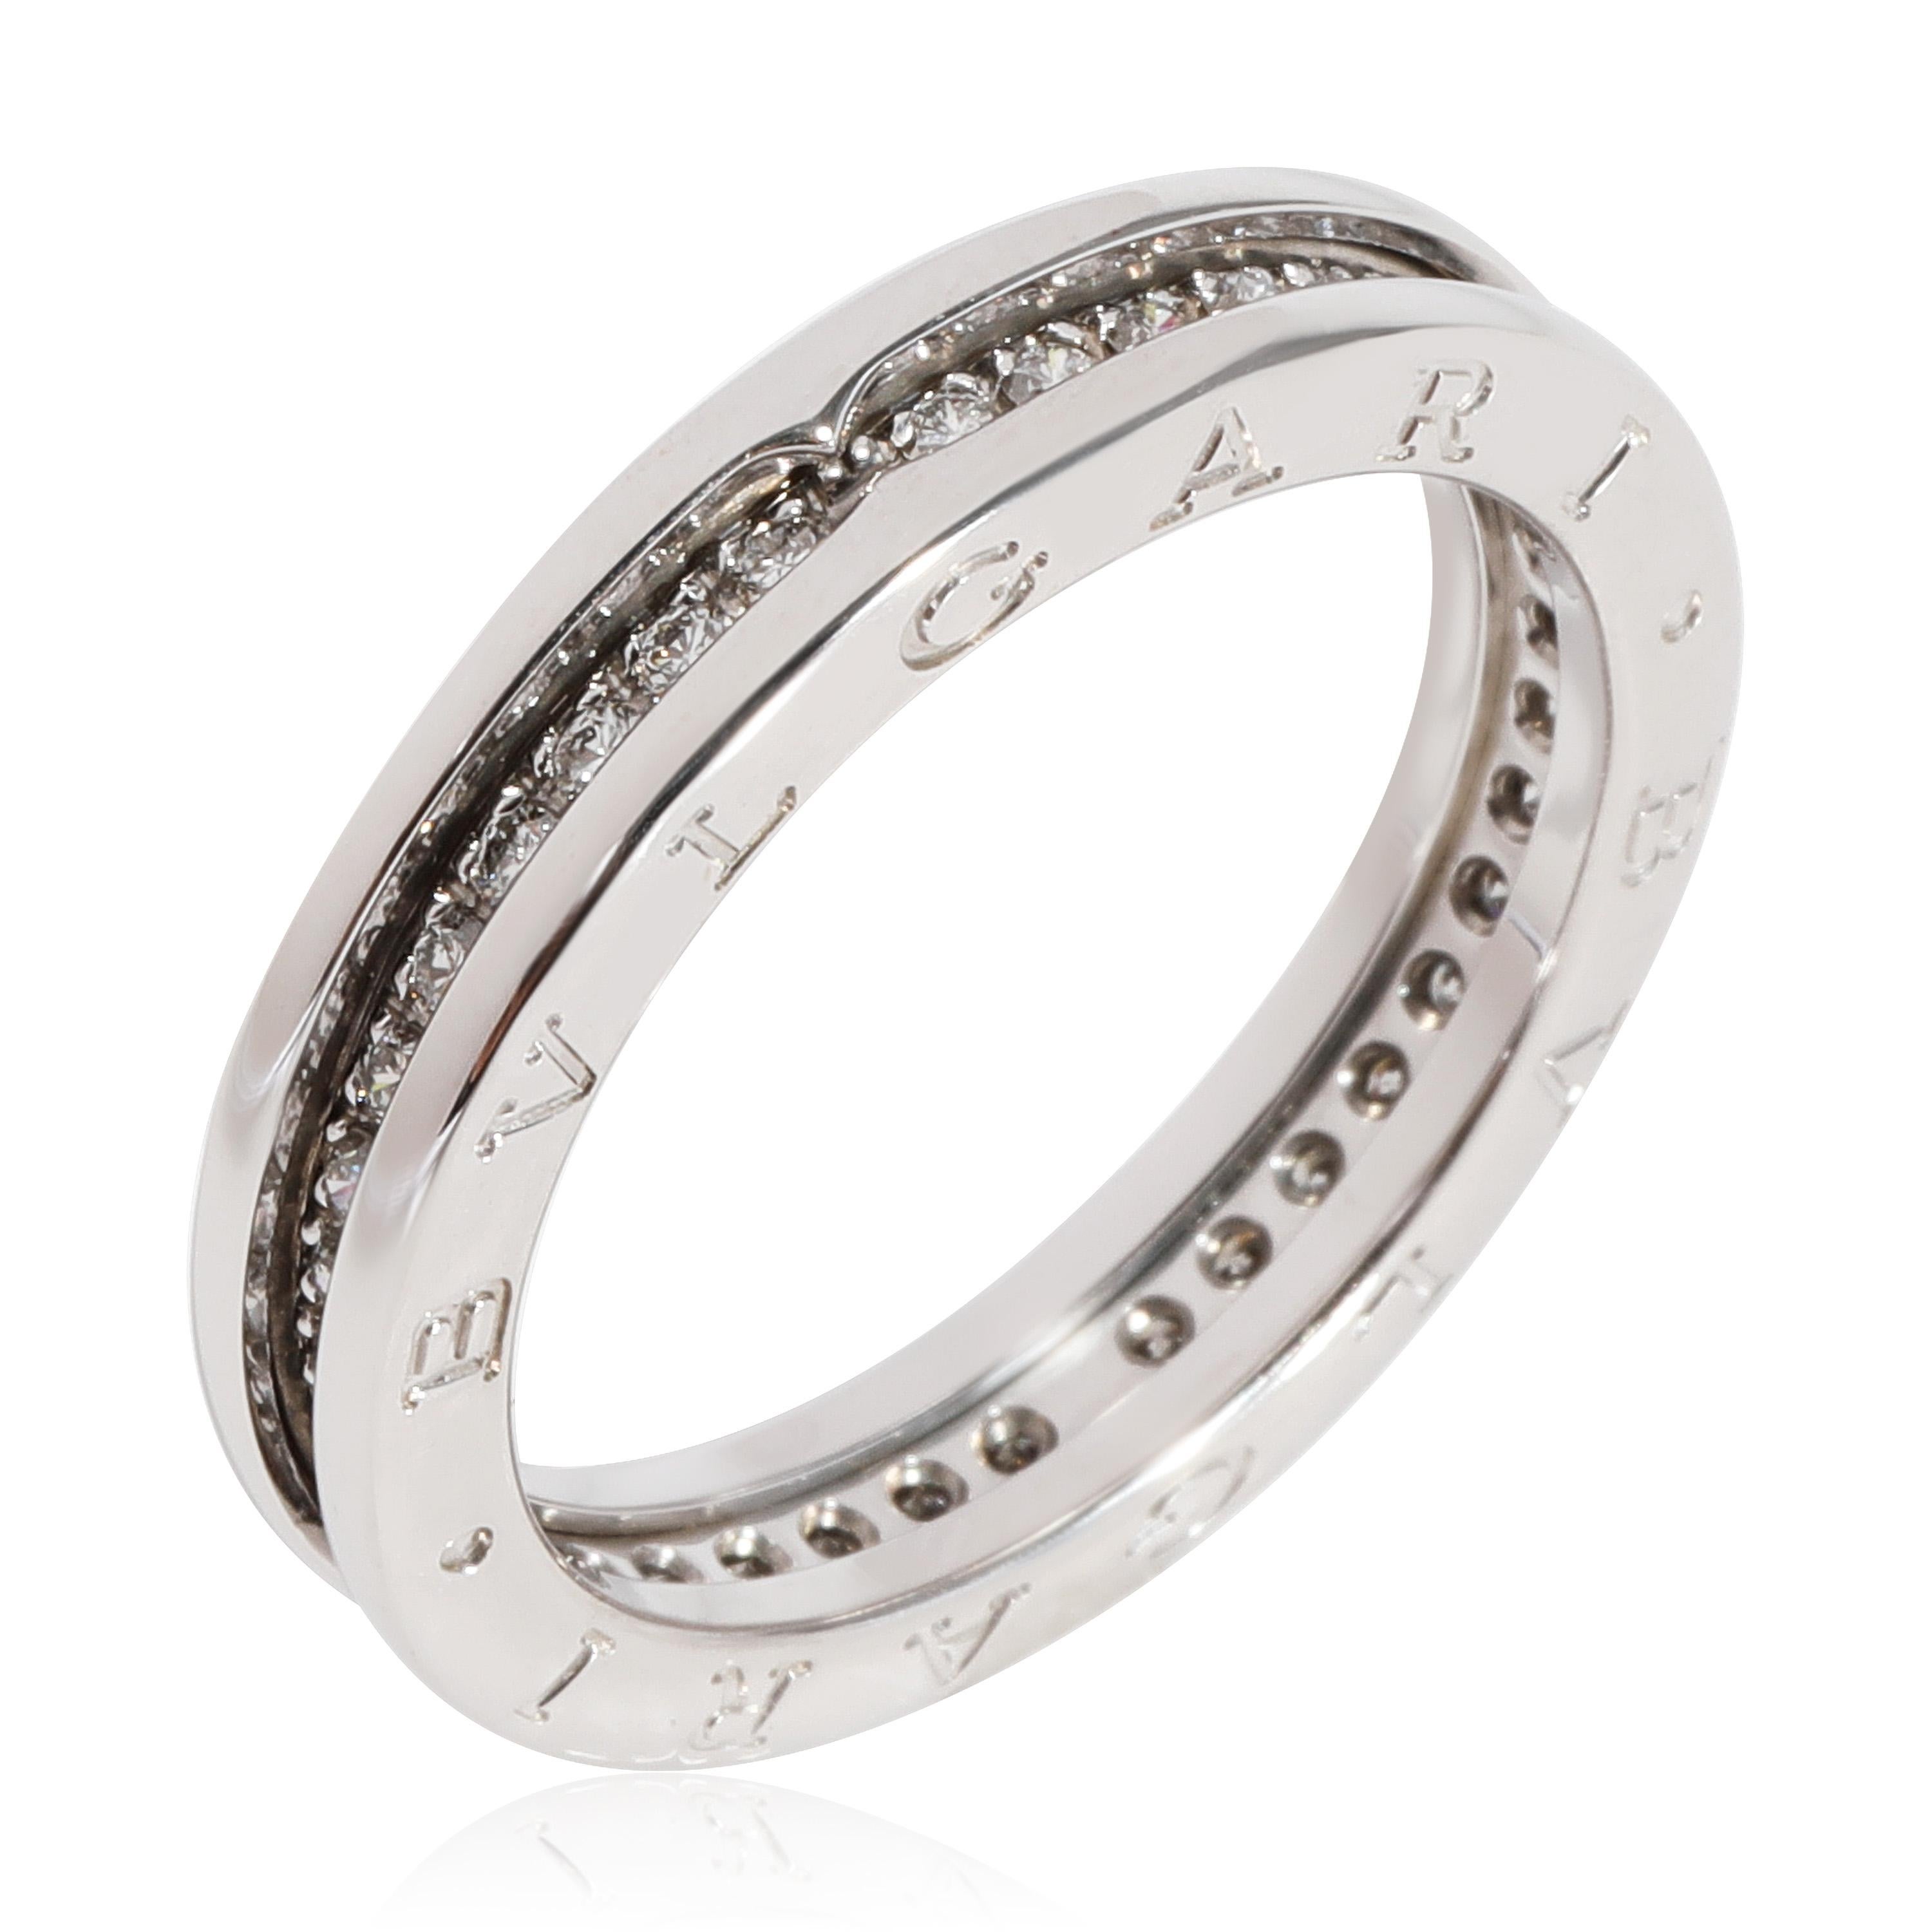 Bulgari B.zero1 Diamond Ring in 18K White Gold 0.45 CTW

PRIMARY DETAILS
SKU: 118371
Listing Title: Bulgari B.zero1 Diamond Ring in 18K White Gold 0.45 CTW
Condition Description: Retails for 6450 USD. In excellent condition and recently polished.